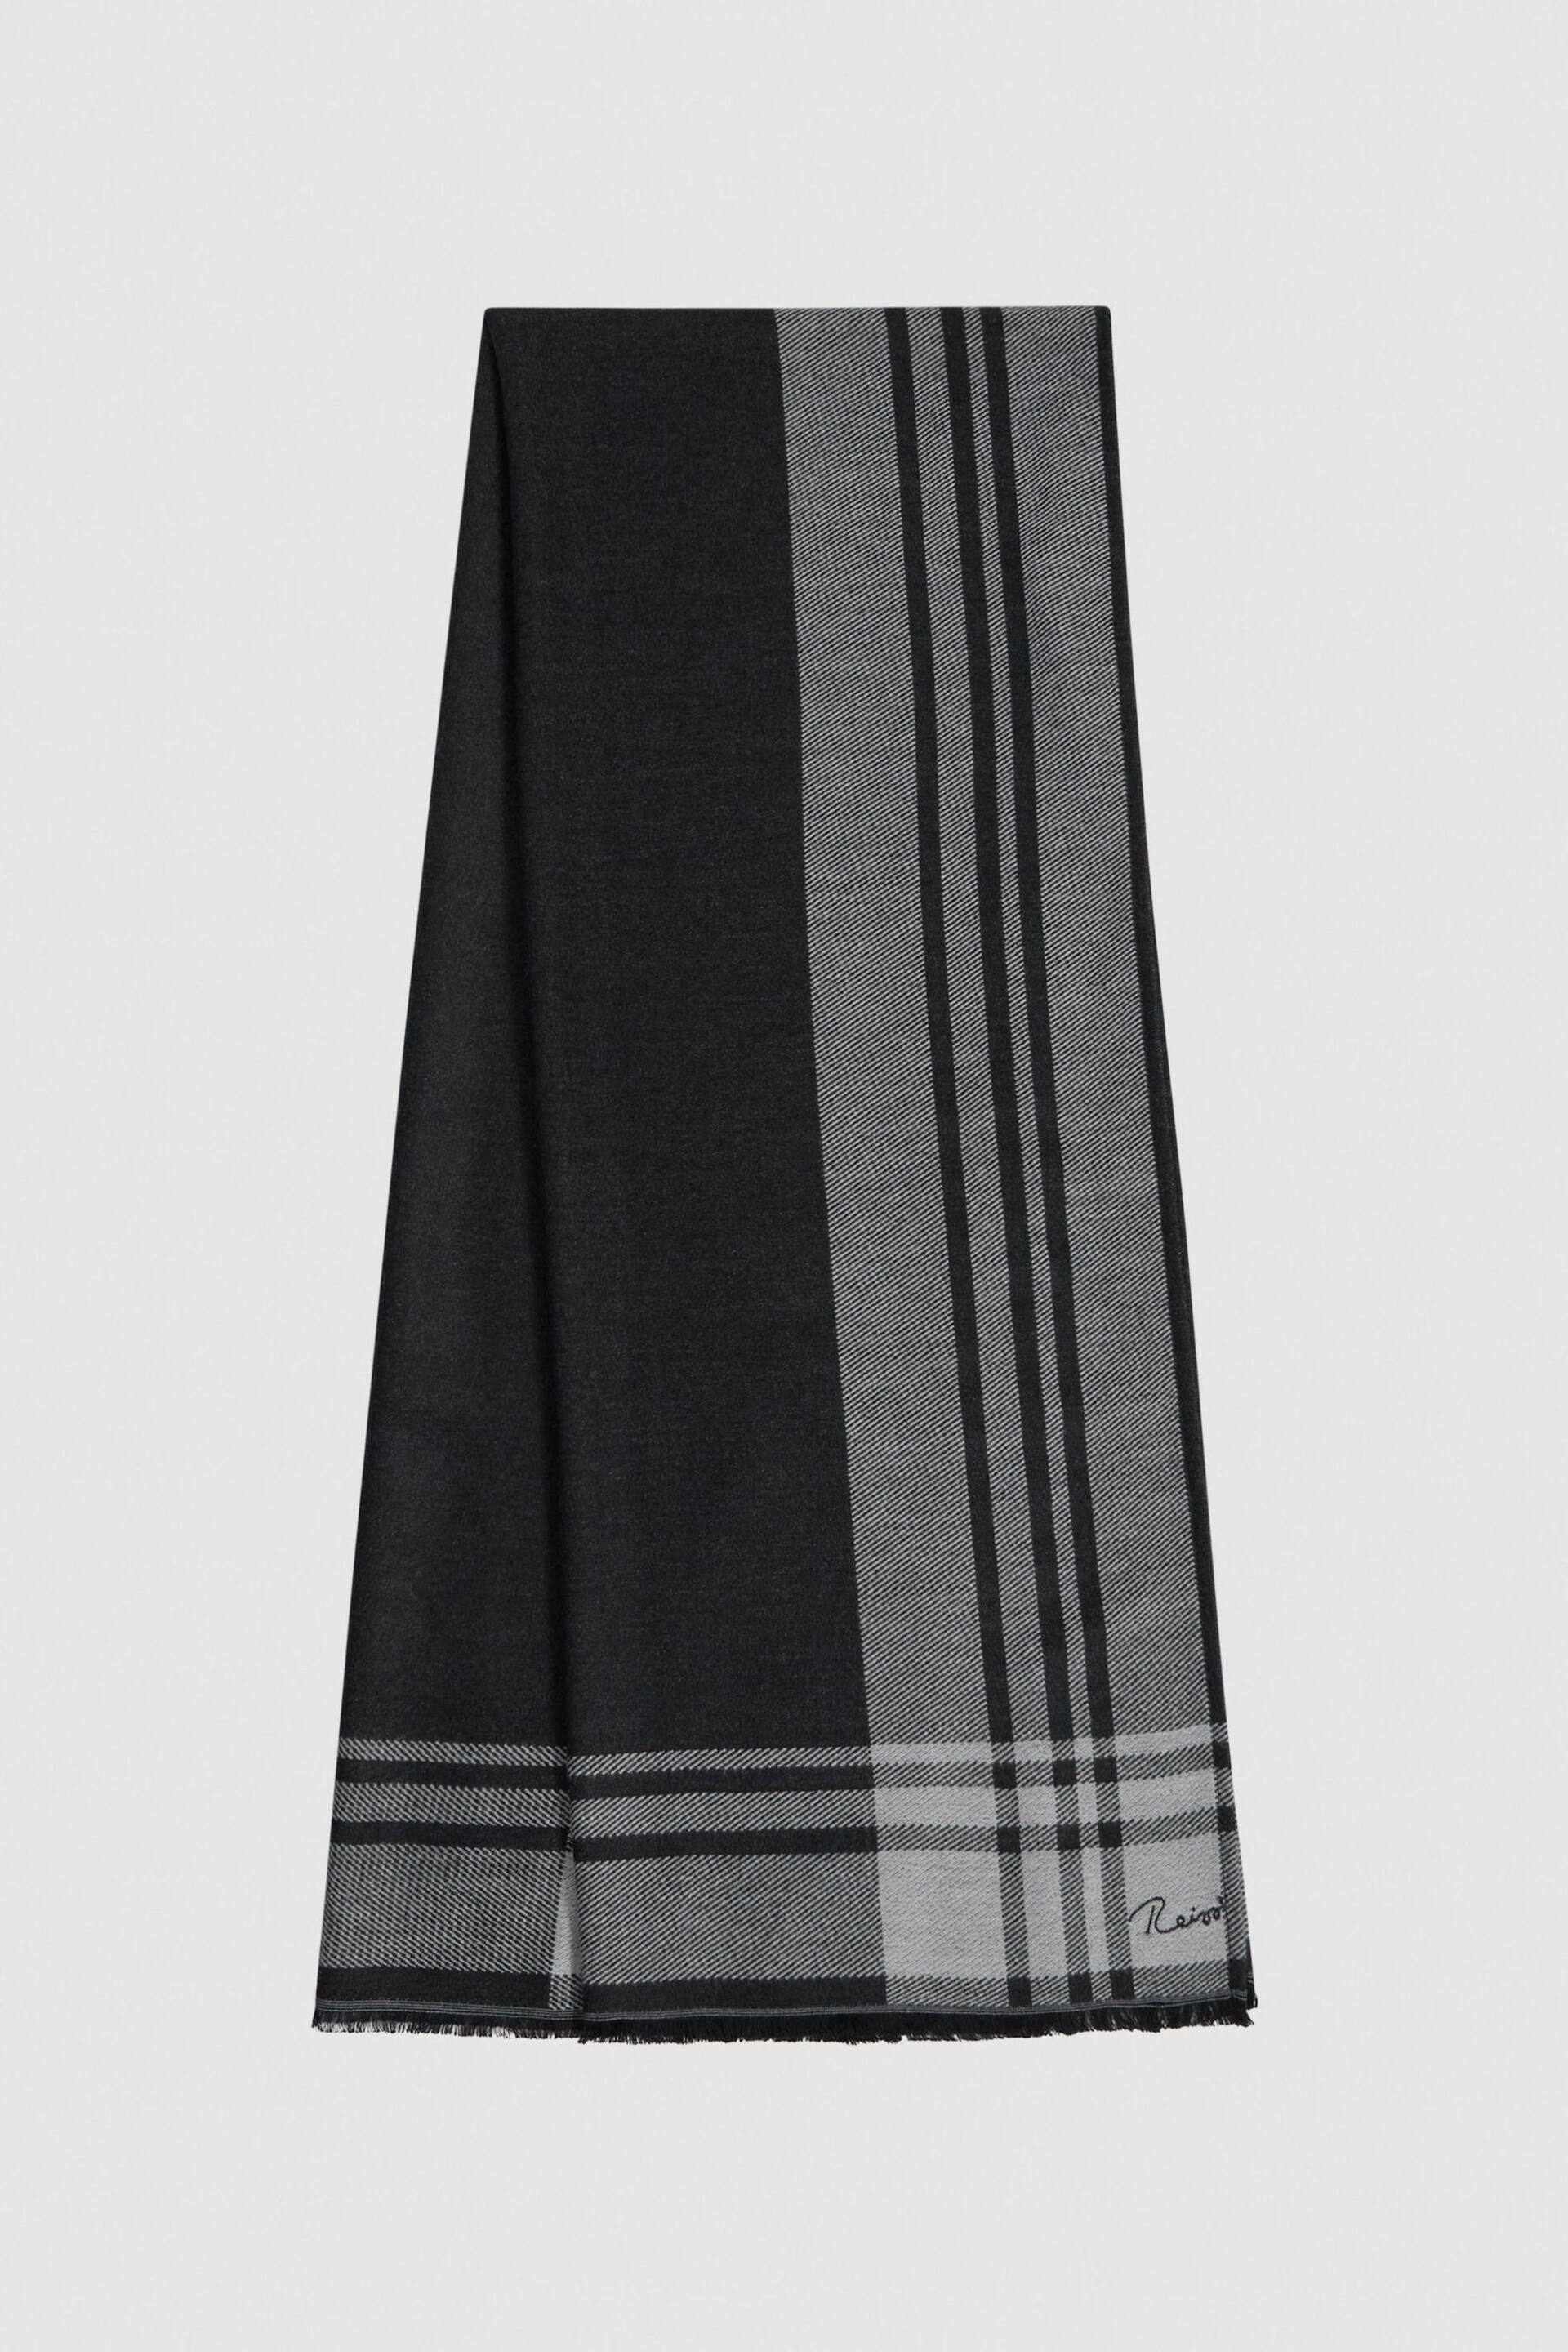 Reiss Black/White Clara Checked Embroidered Scarf - Image 1 of 4